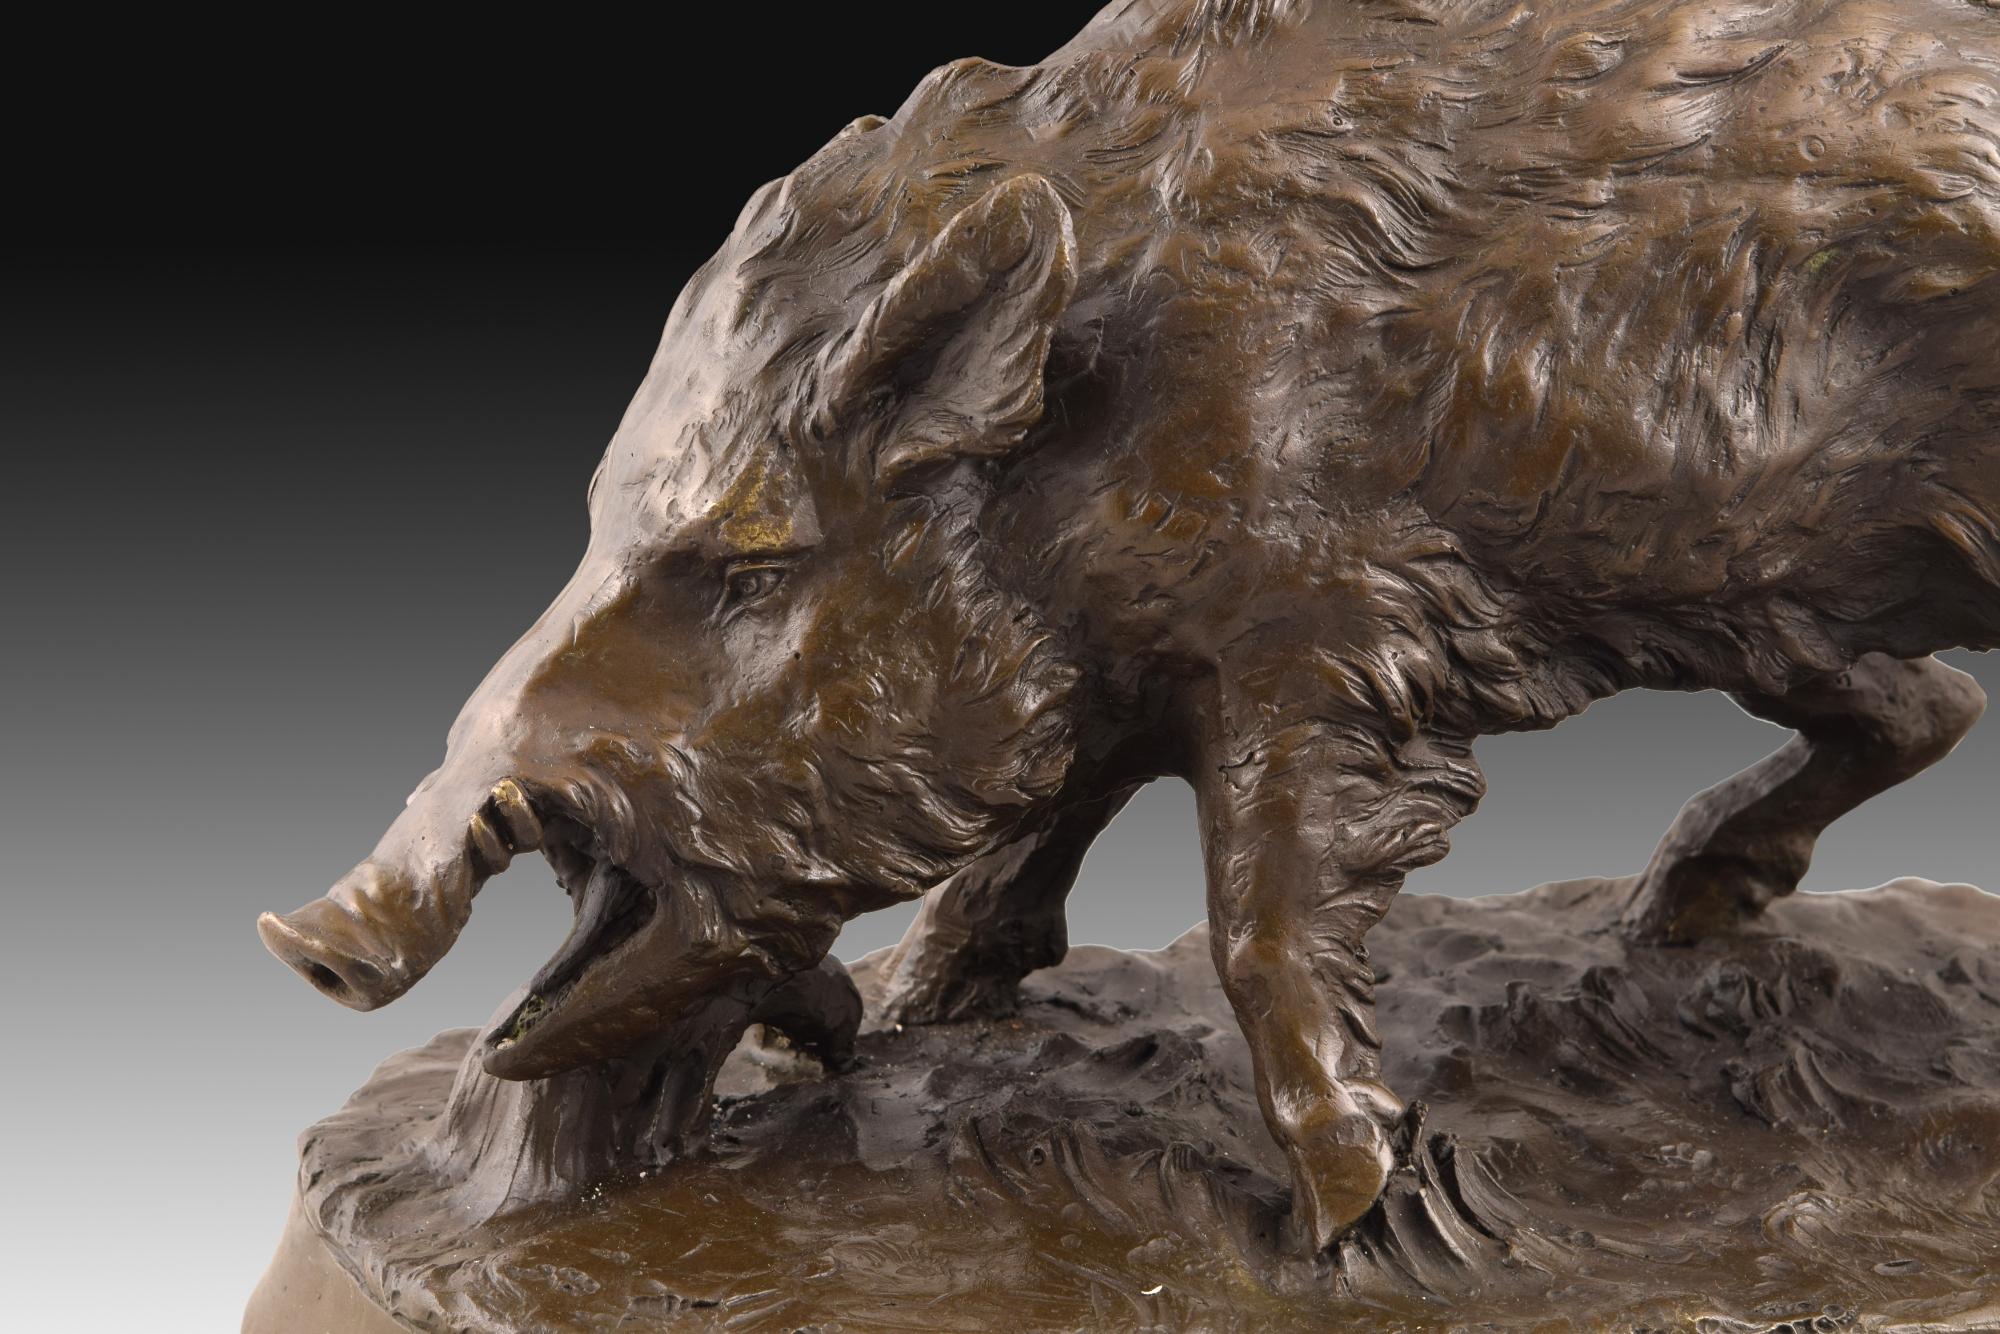 Lost wax casting. 
On an oval base, the boar is placed walking. It is necessary to emphasize the realism of the work both in the treatment of the skin and its anatomy and in its attitude. This type of sculptures were very popular since the 19th